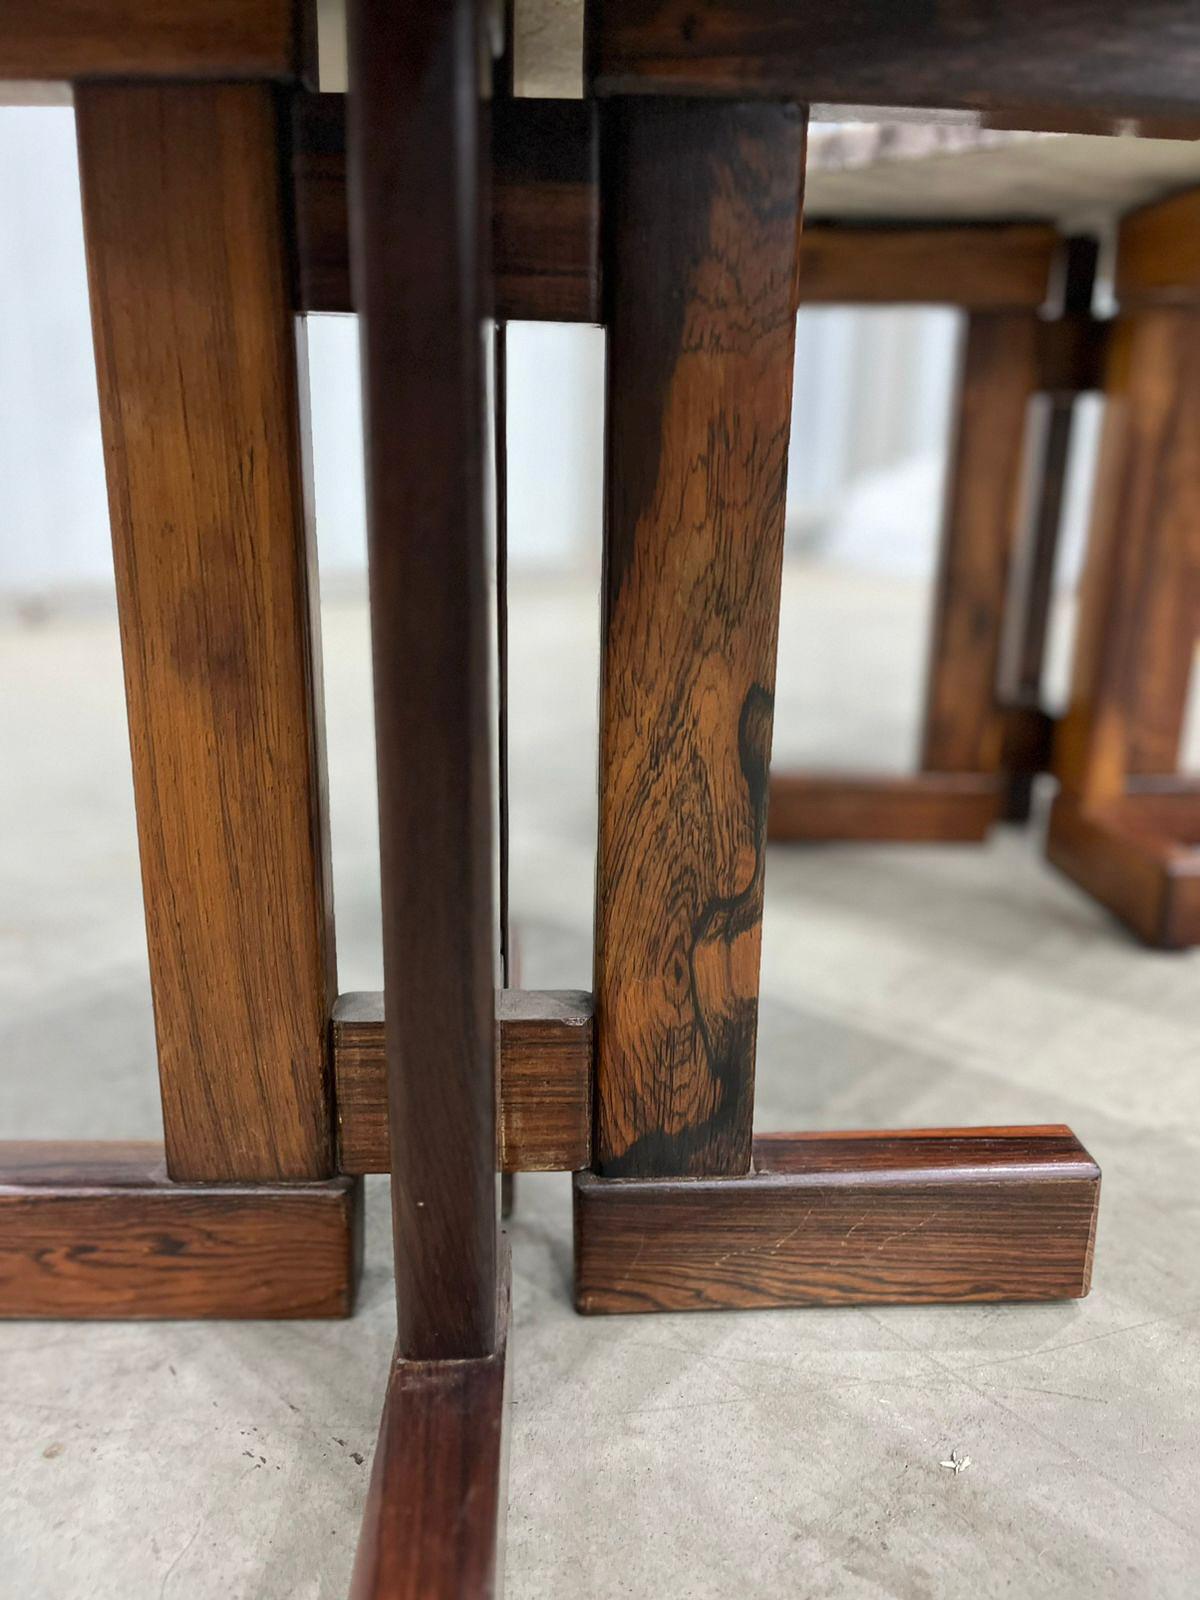 Brazilian Modern Pair of Side Tables in Rosewood and Granite by Celina, c. 1960 For Sale 9